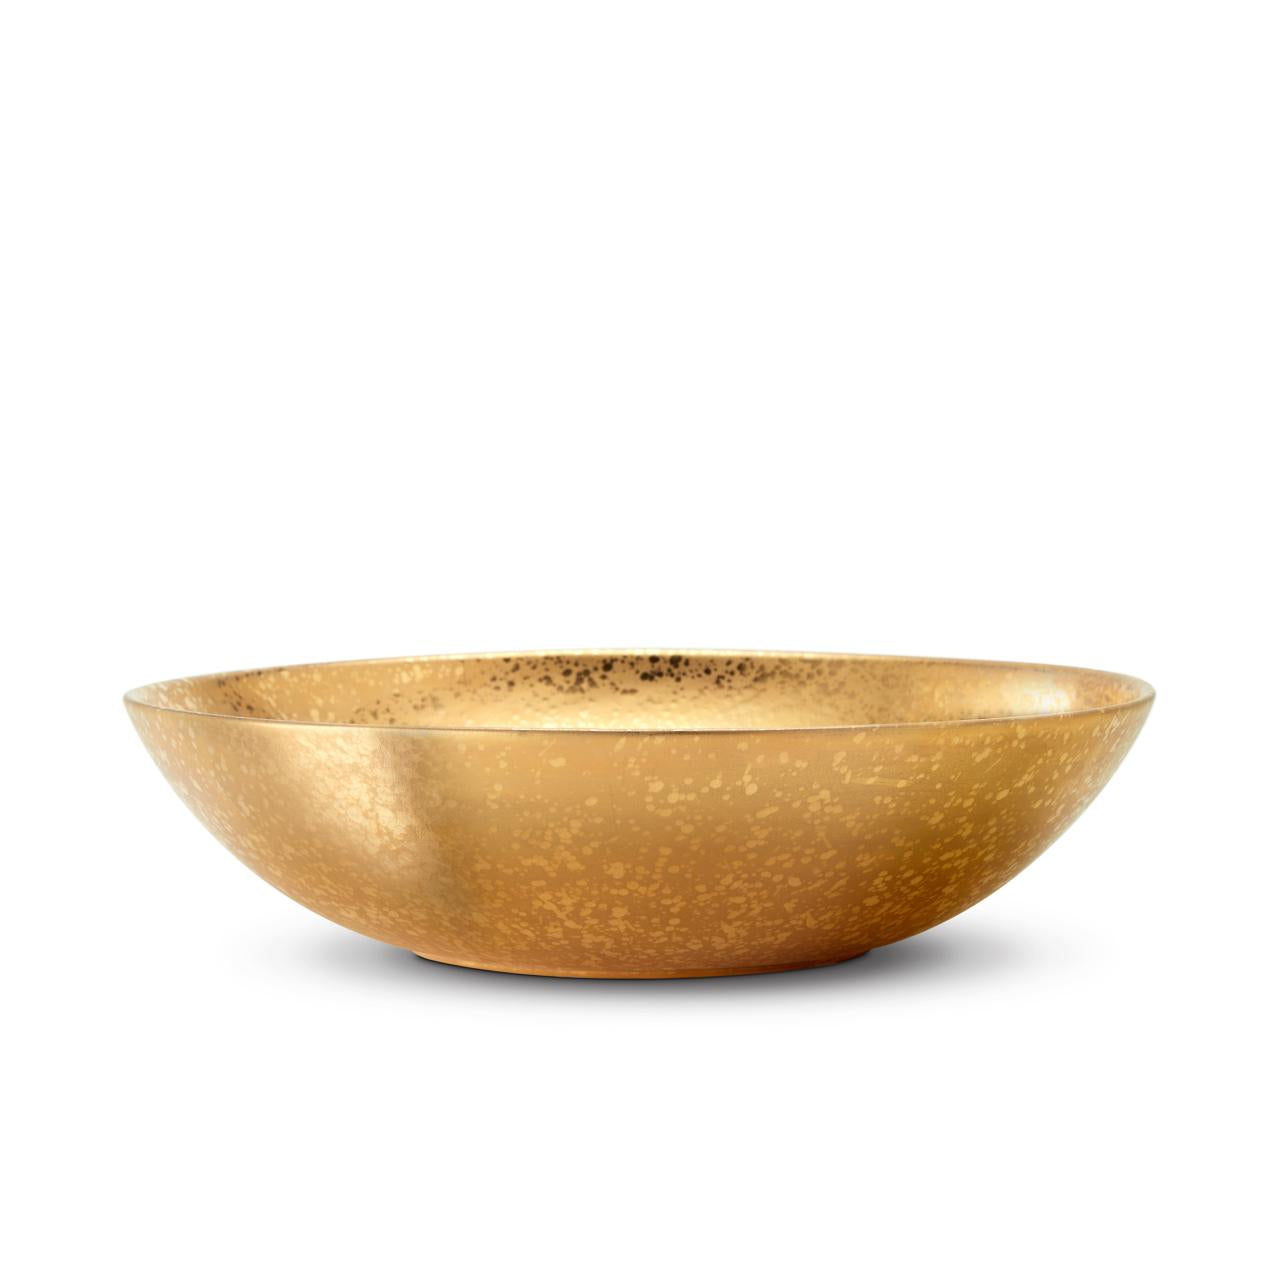 Alchimie Coupe Bowl - Large - RSVP Style